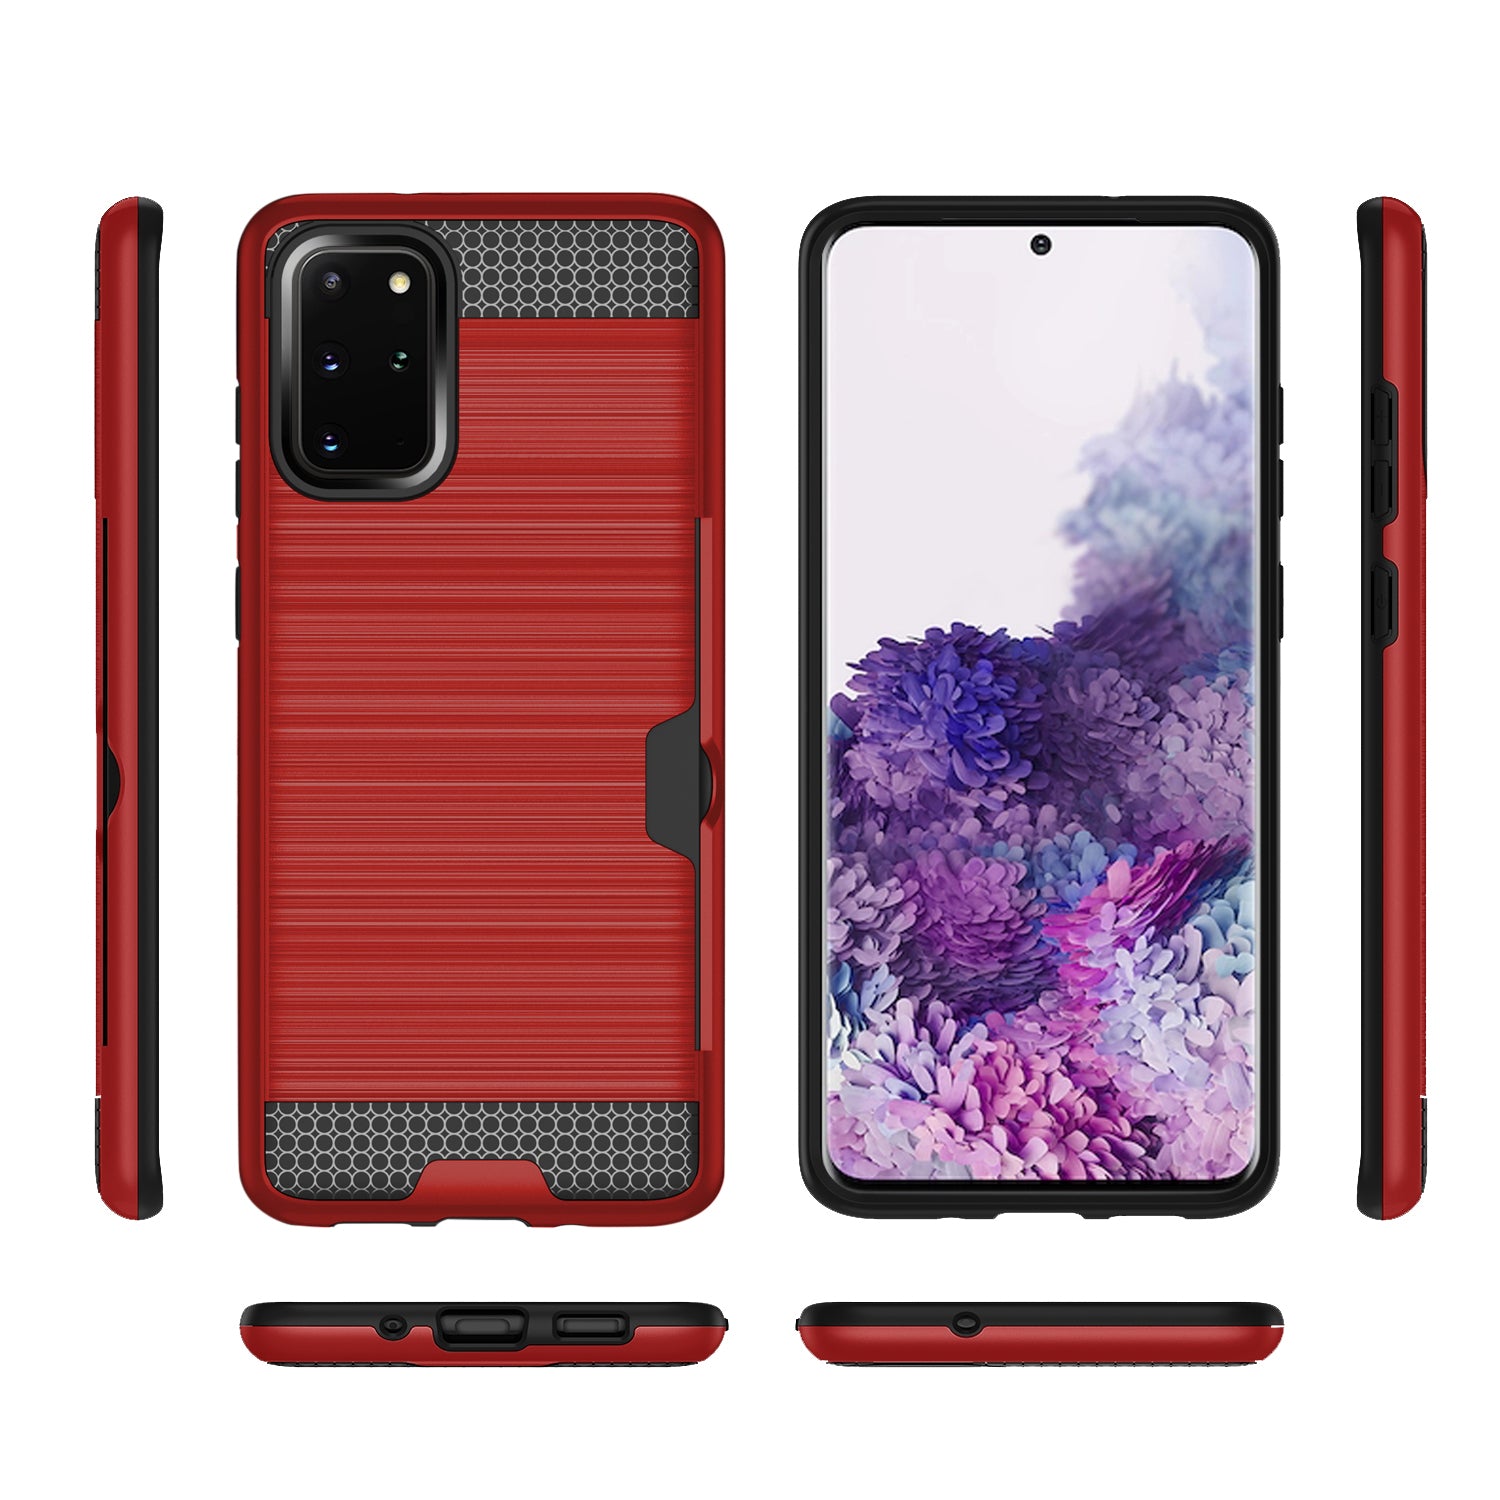 SAMSUNG GALAXY S20 PLUS SLIM ARMOR HYBRID CASE WITH CARD HOLDER IN RED